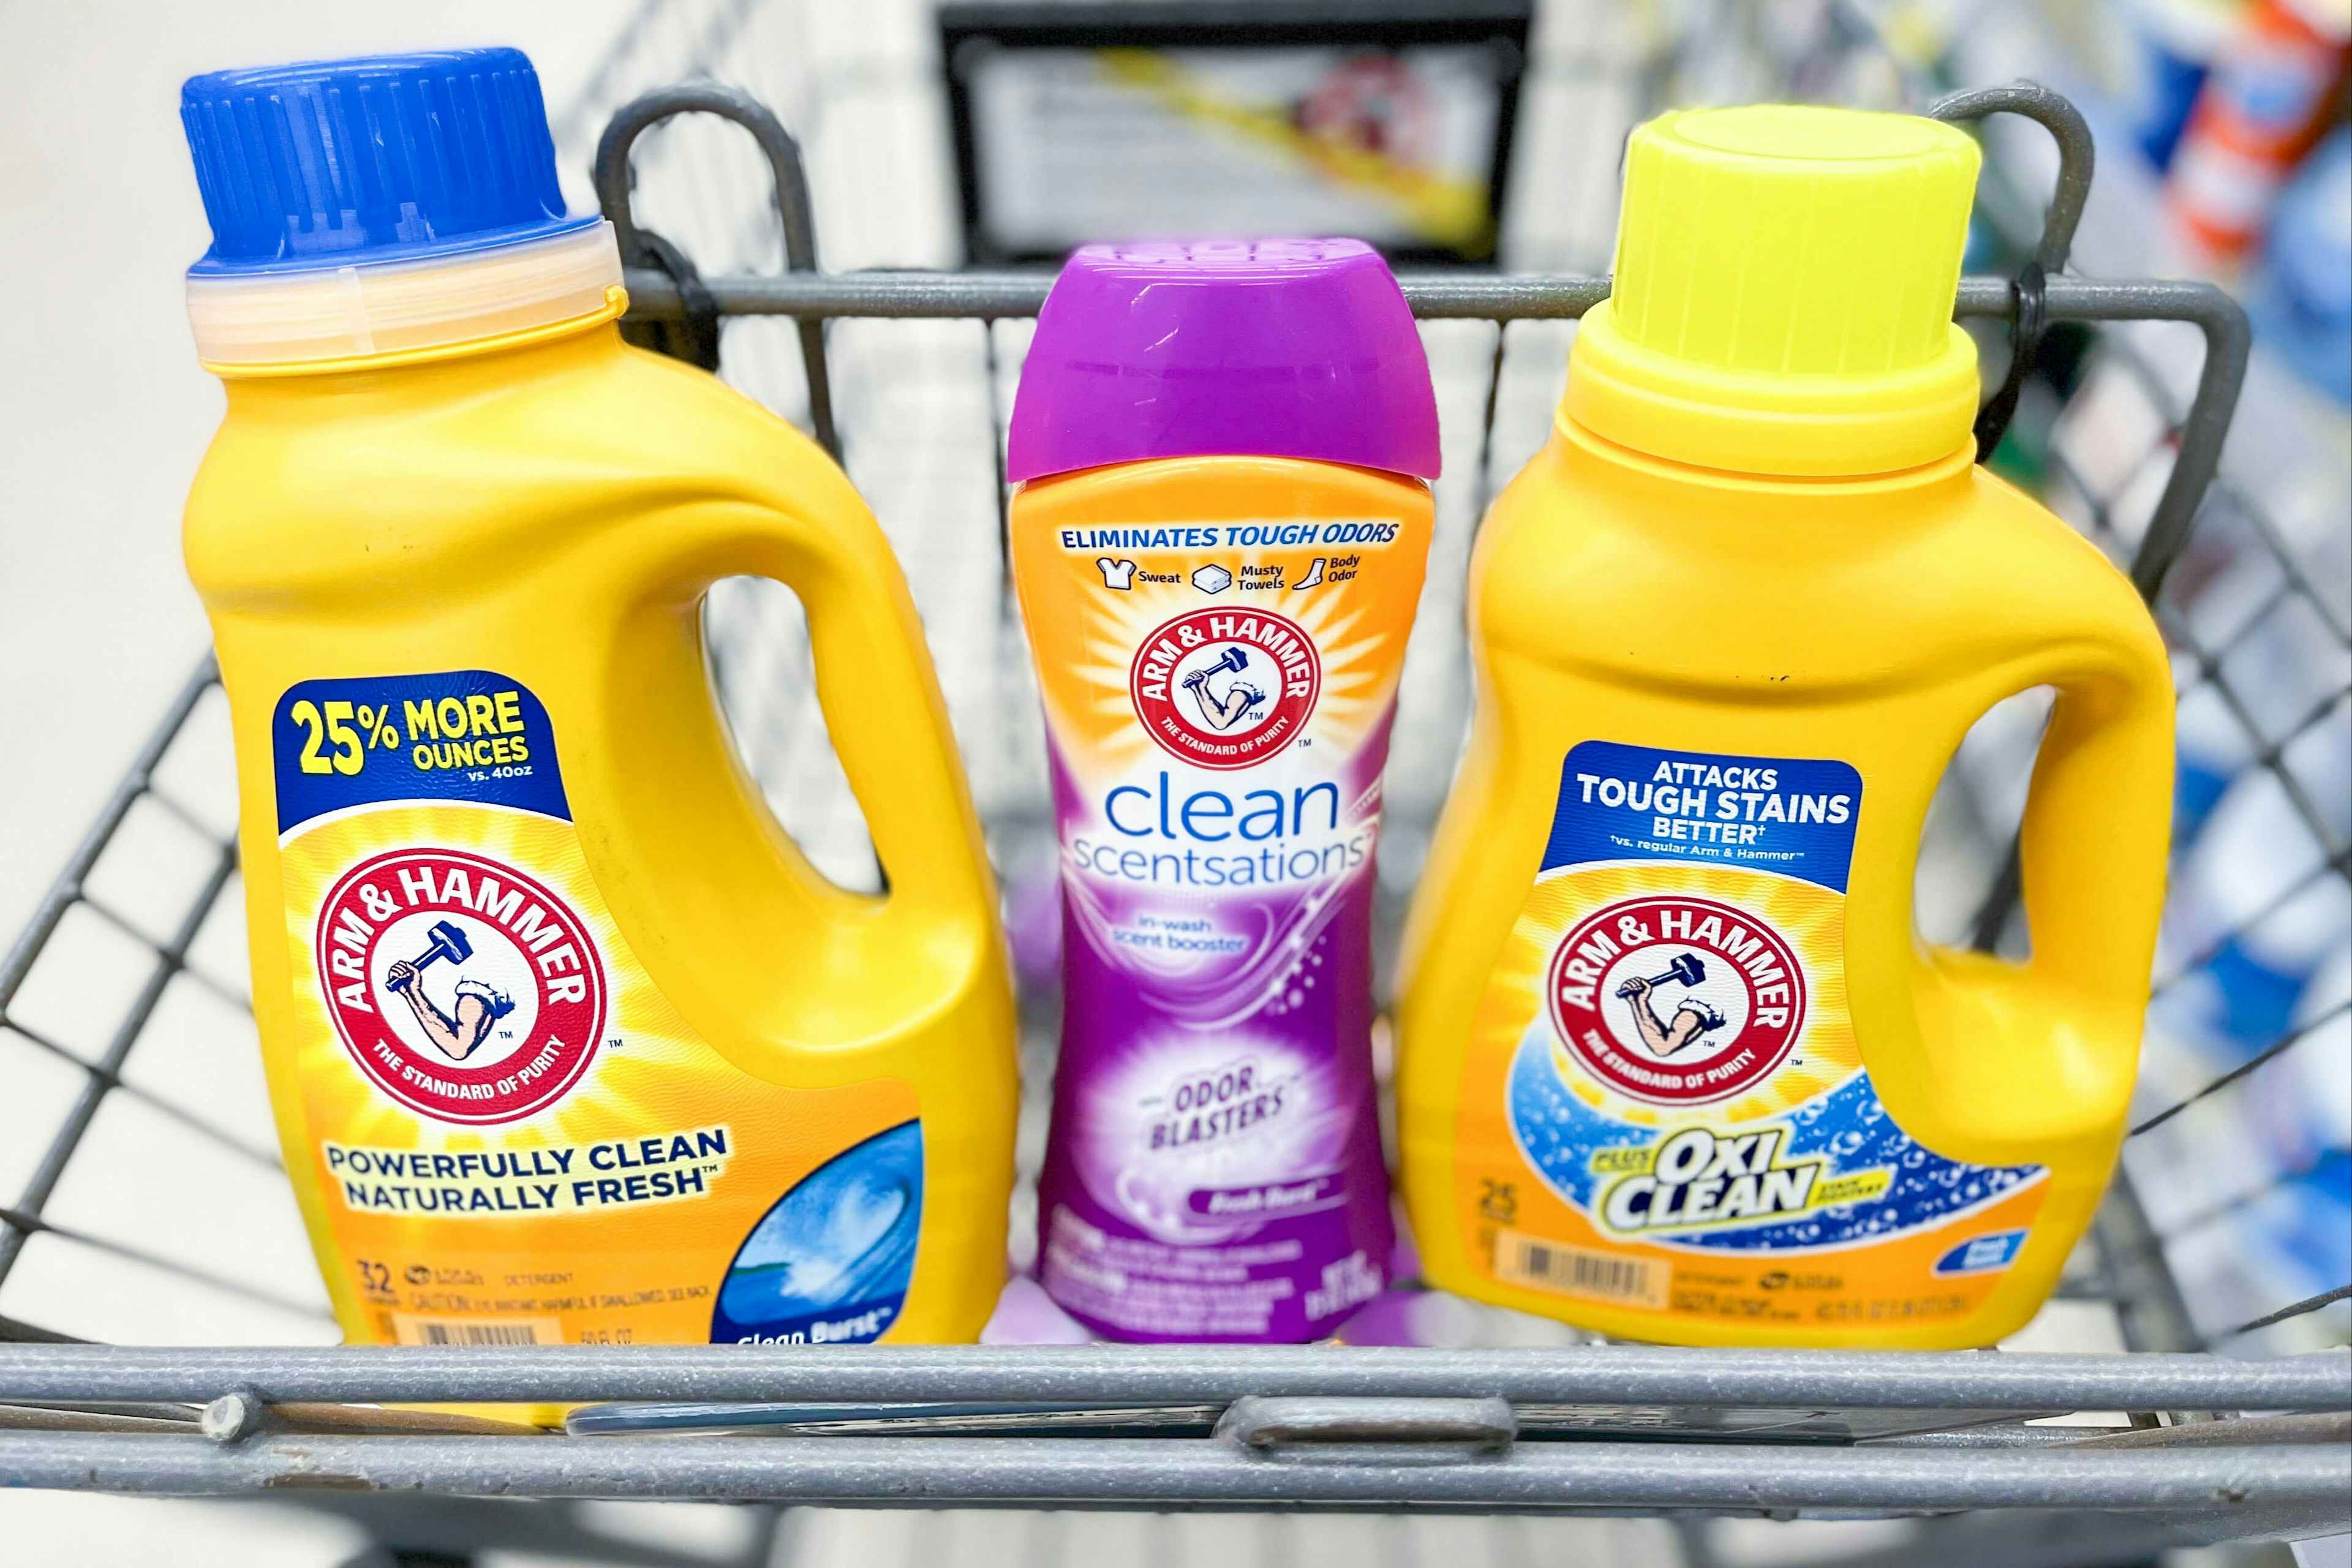 walgreens-arm-and-hammer-laundry-detergent-clean-sensations-022122